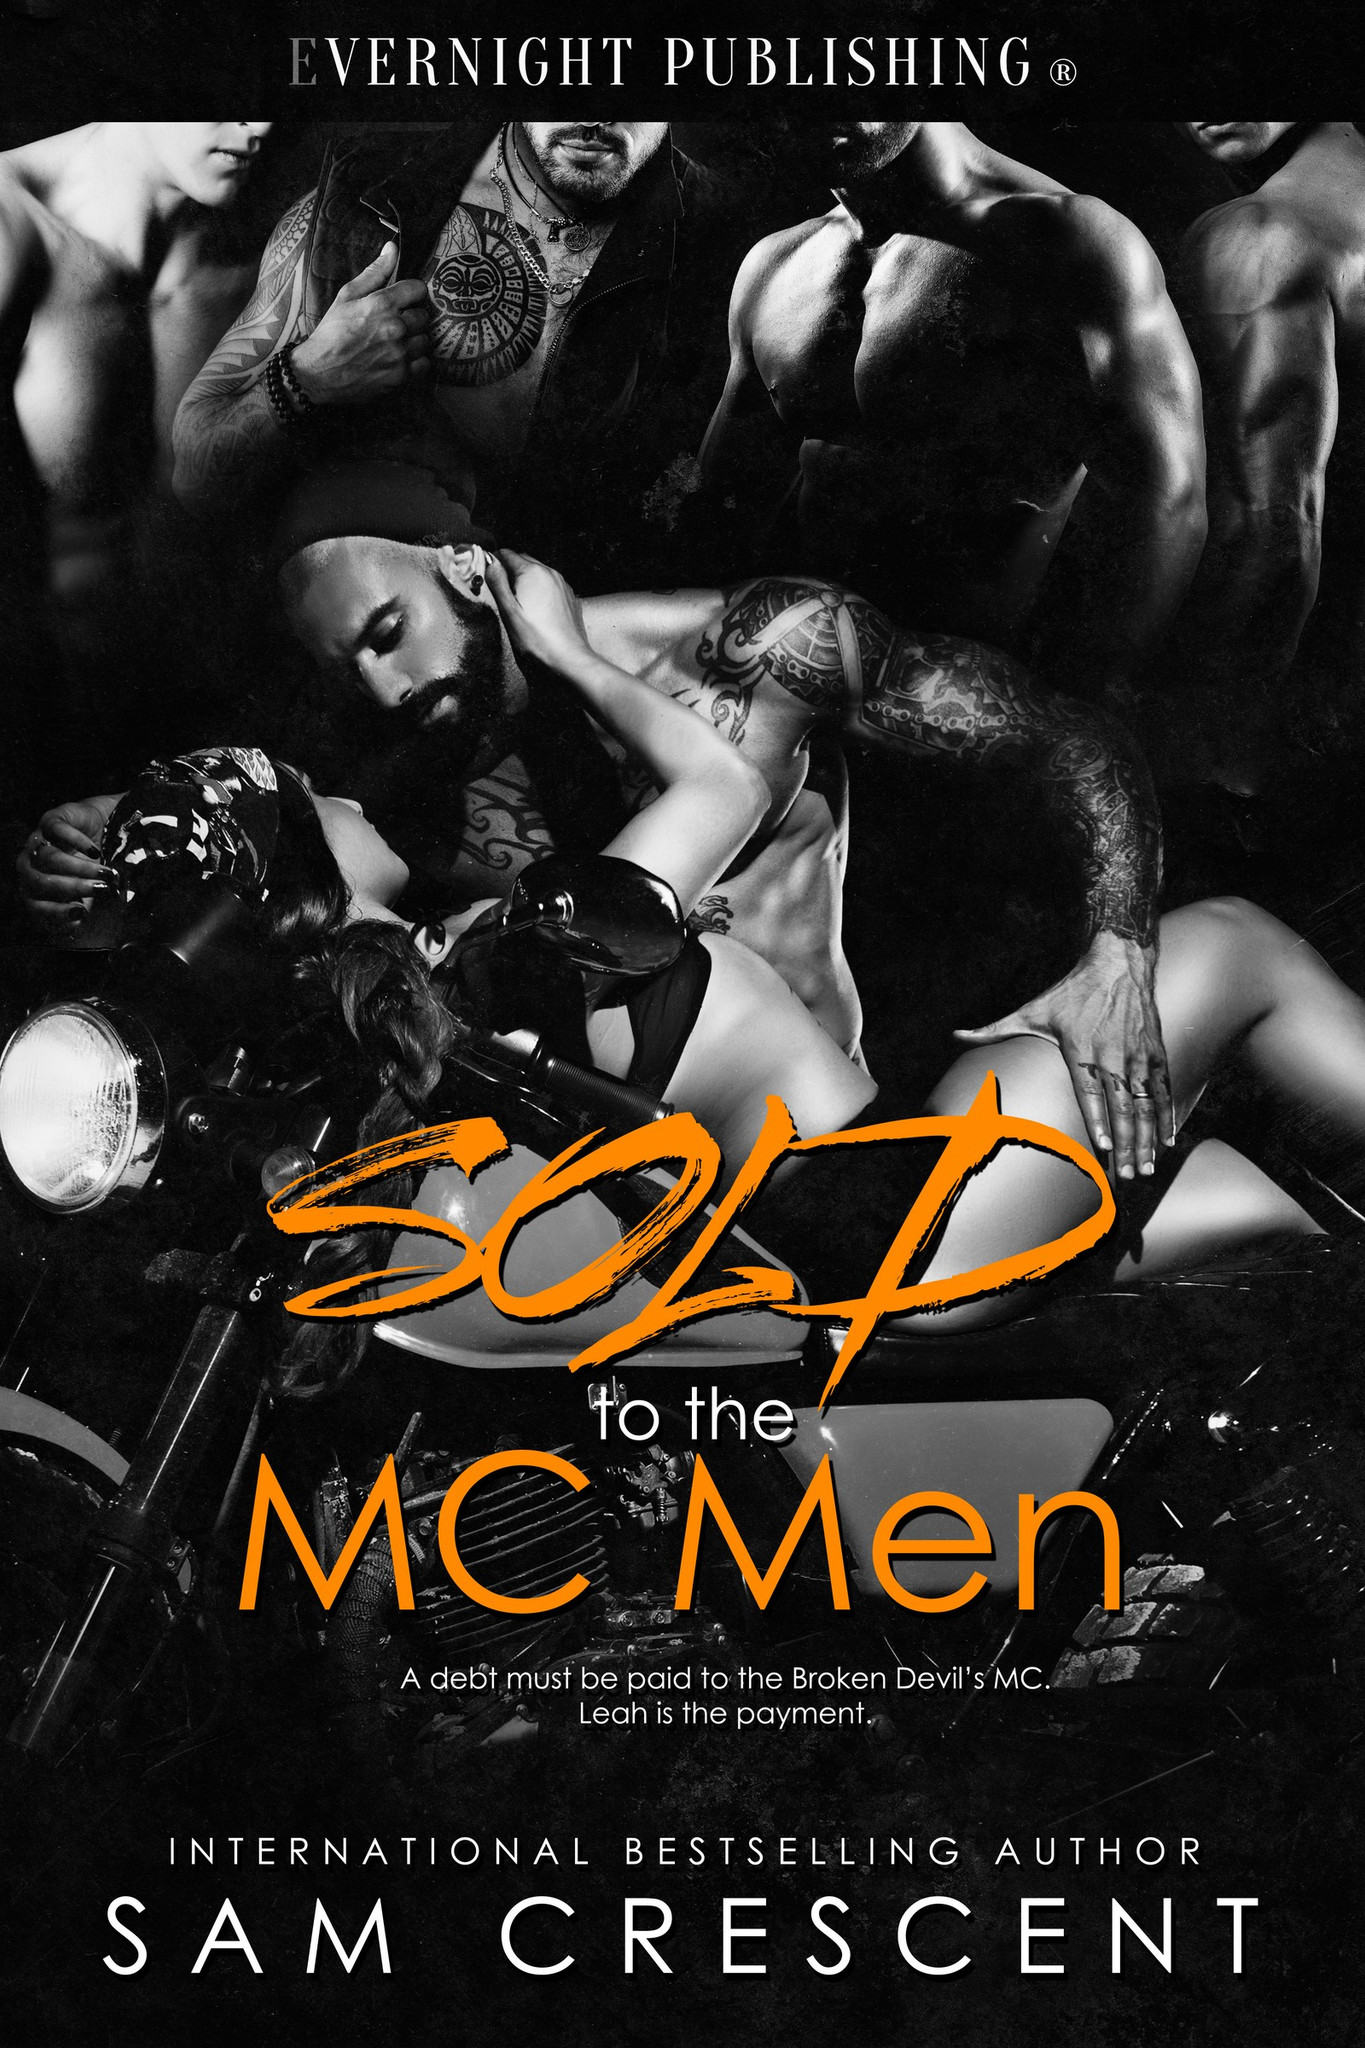 Sold to the MC Men by Sam Crescent photo